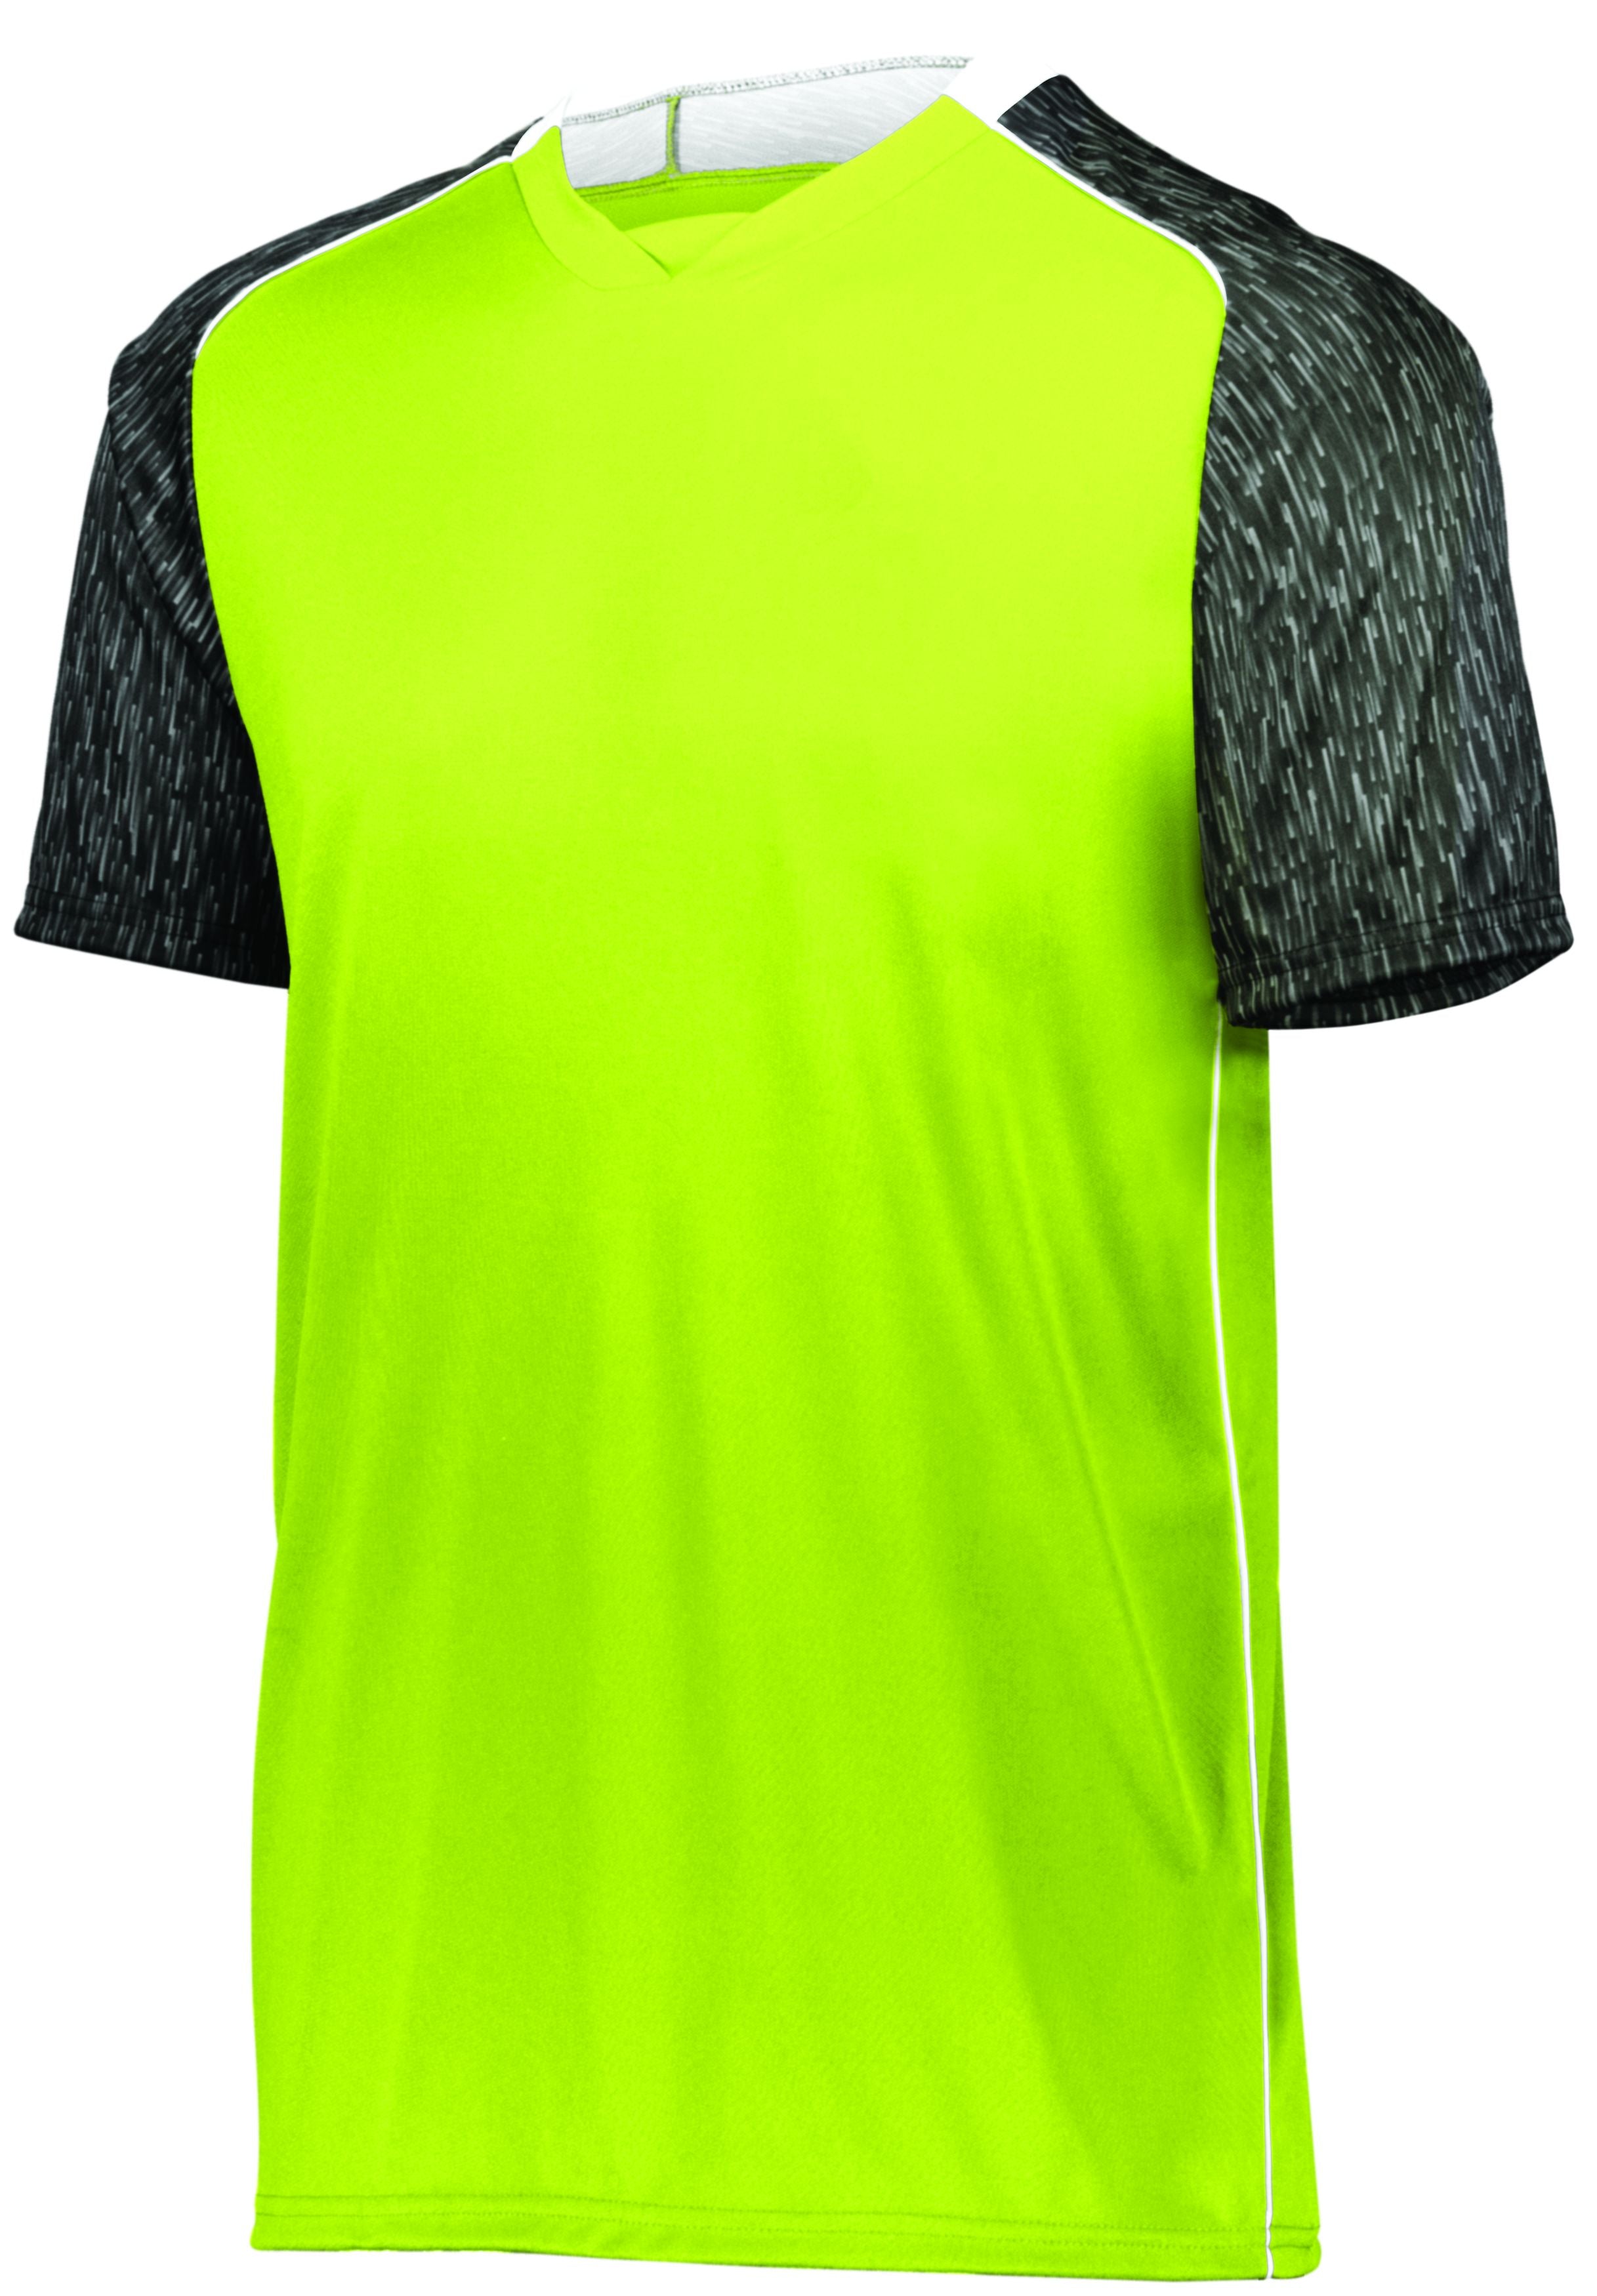 High 5 Youth Hawthorn Soccer Jersey in Lime/Black Print/White  -Part of the Youth, Youth-Jersey, High5-Products, Soccer, Shirts, All-Sports-1 product lines at KanaleyCreations.com